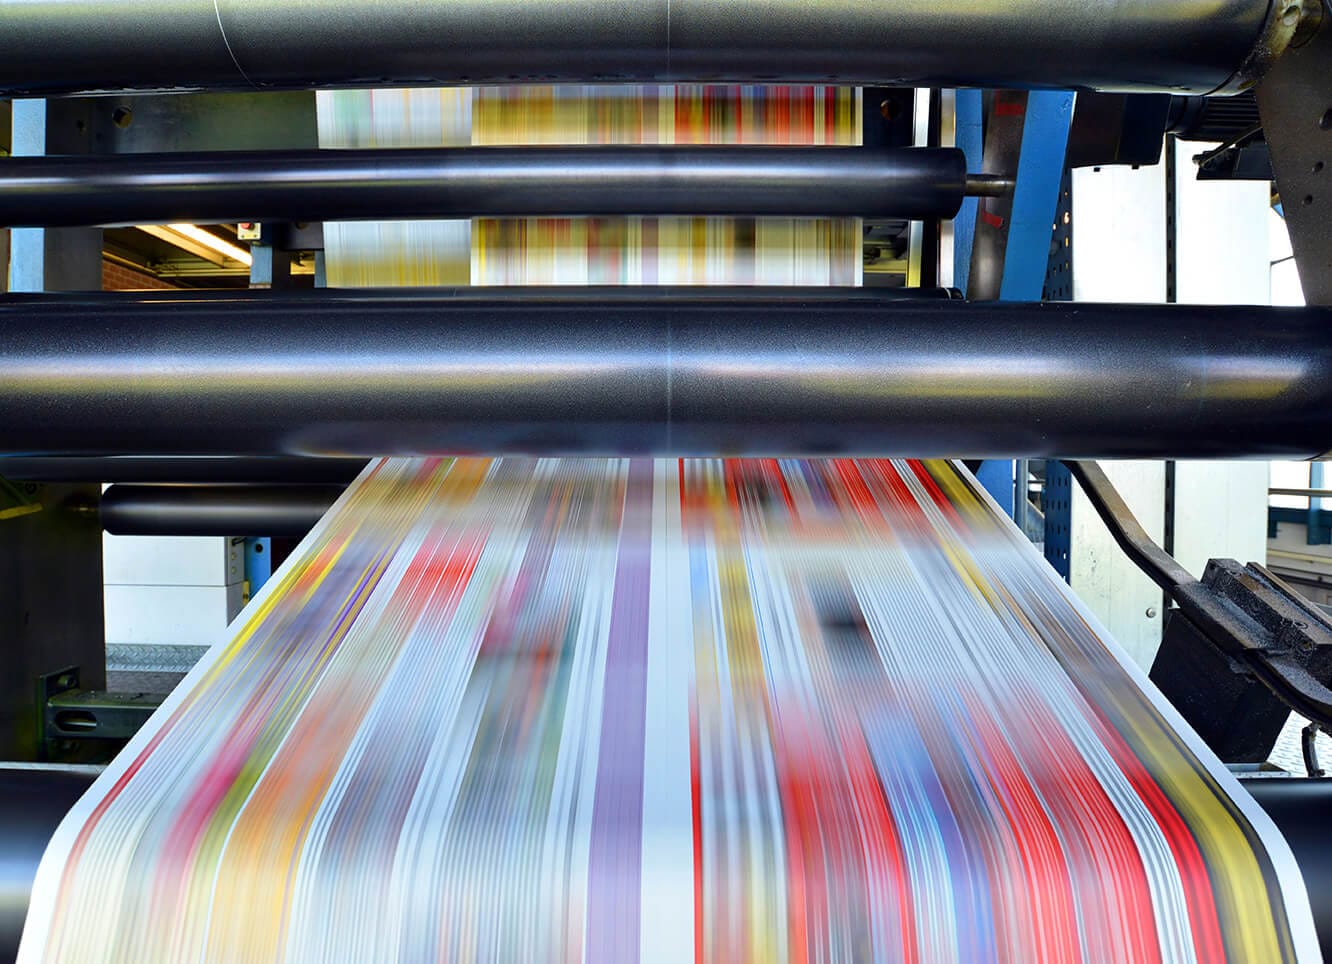 Printing machine with streaks of vibrant colors.